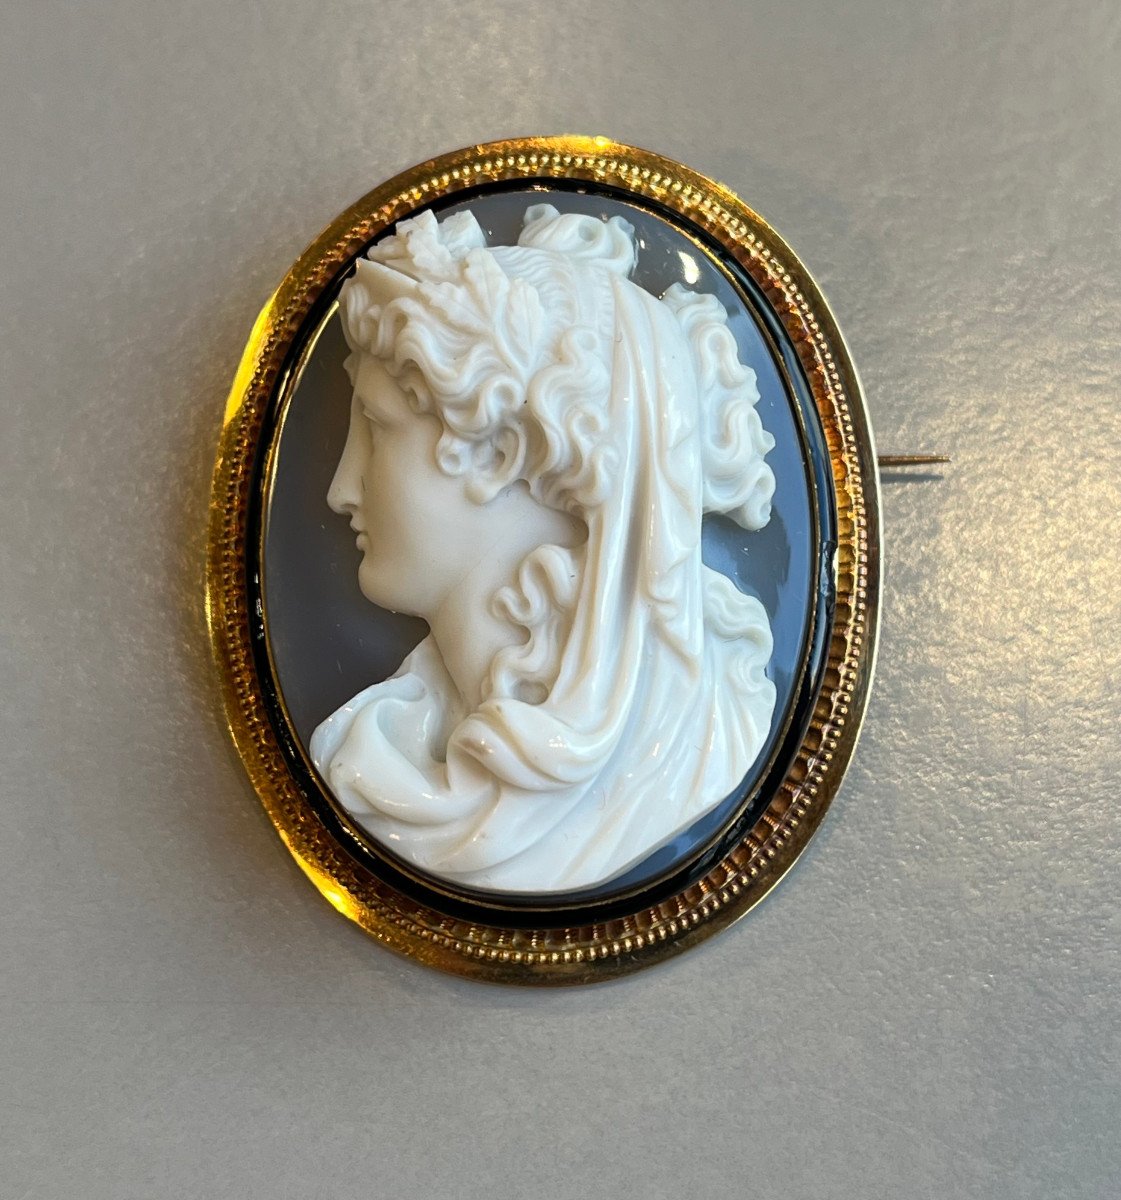 Gold And Enamel Brooch Set With A Large Cameo On Agate. 19th Century-photo-4